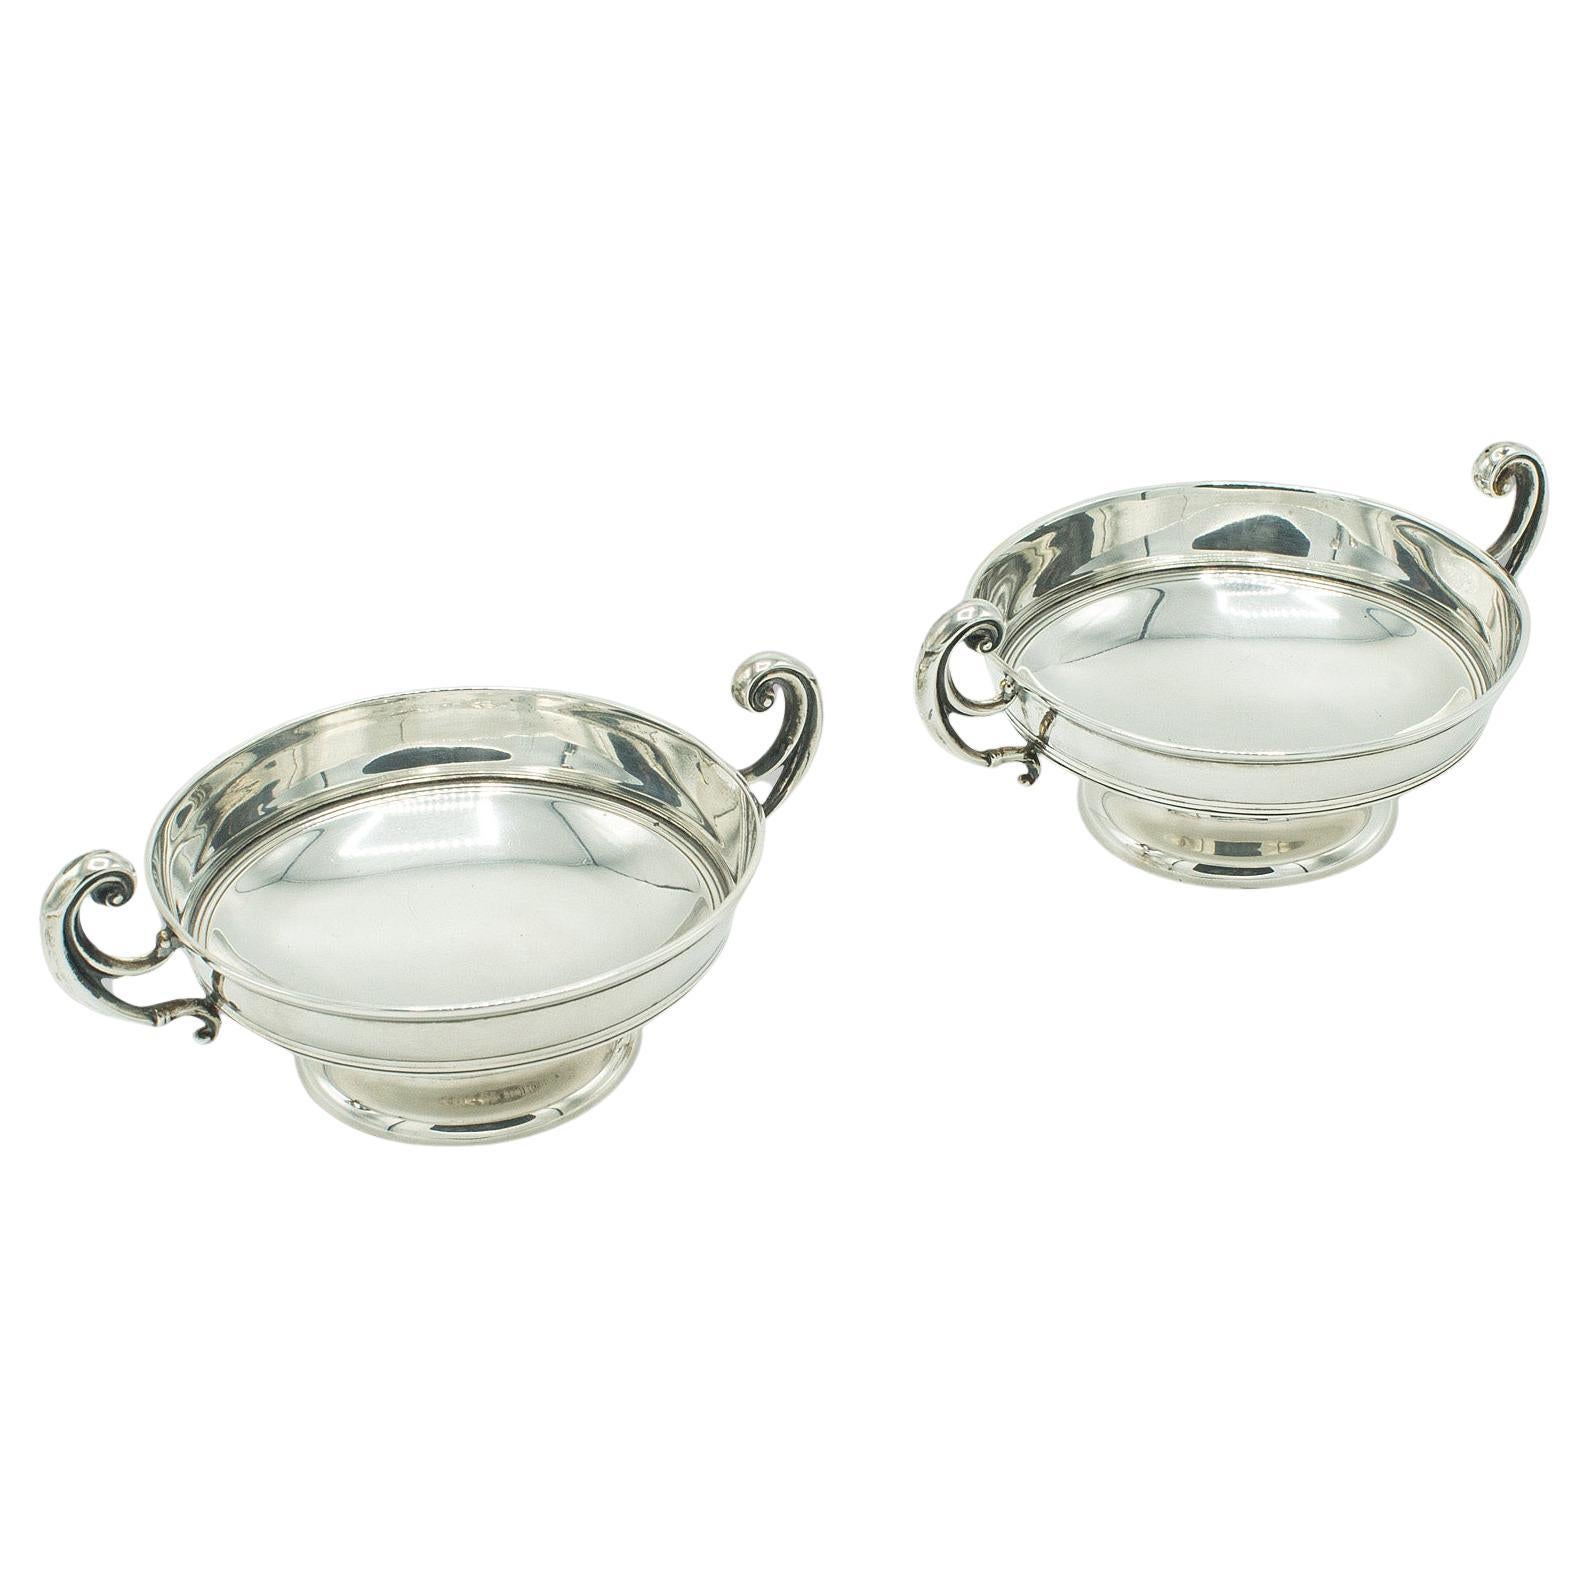 Pair of Antique Bonbon Dishes, English, Sterling Silver, Serving Bowl, Edwardian For Sale